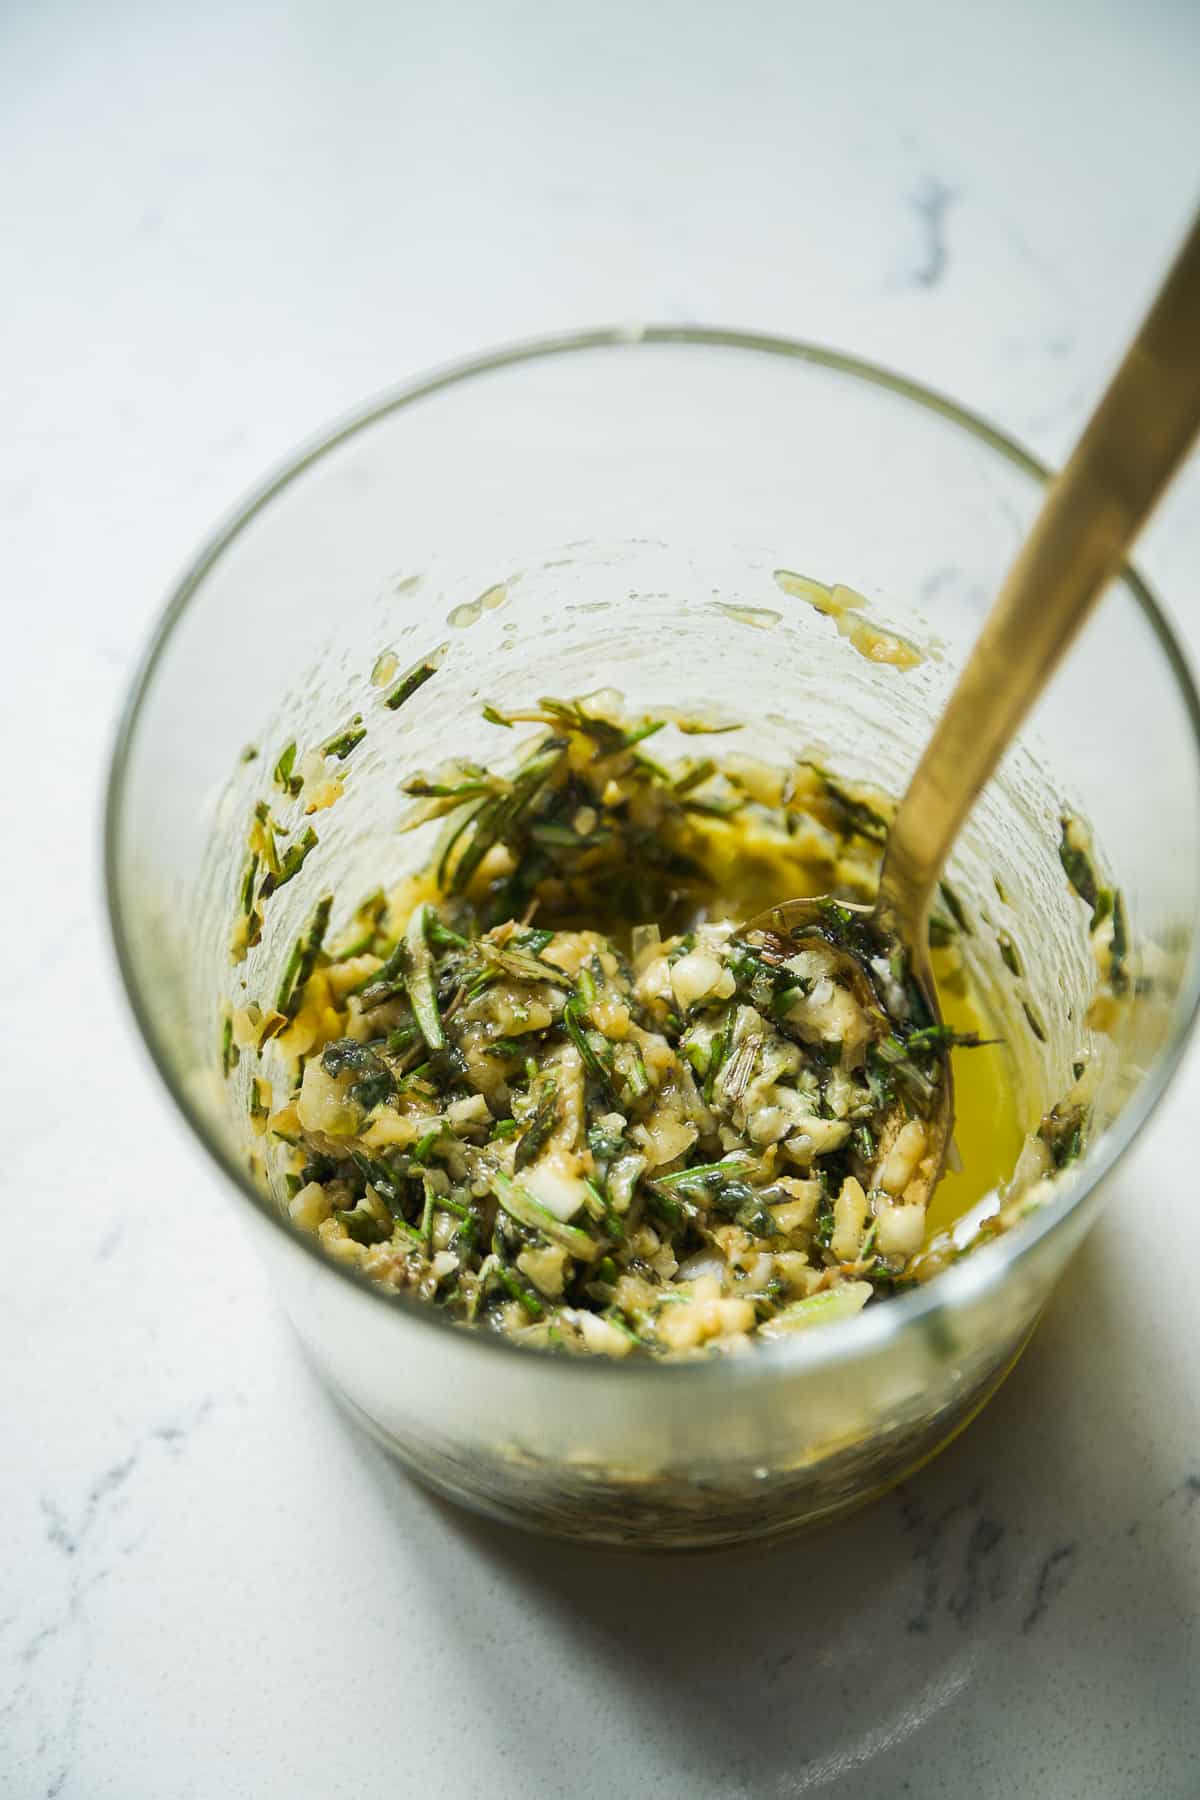 Garlic and herb coating in a glass jar.